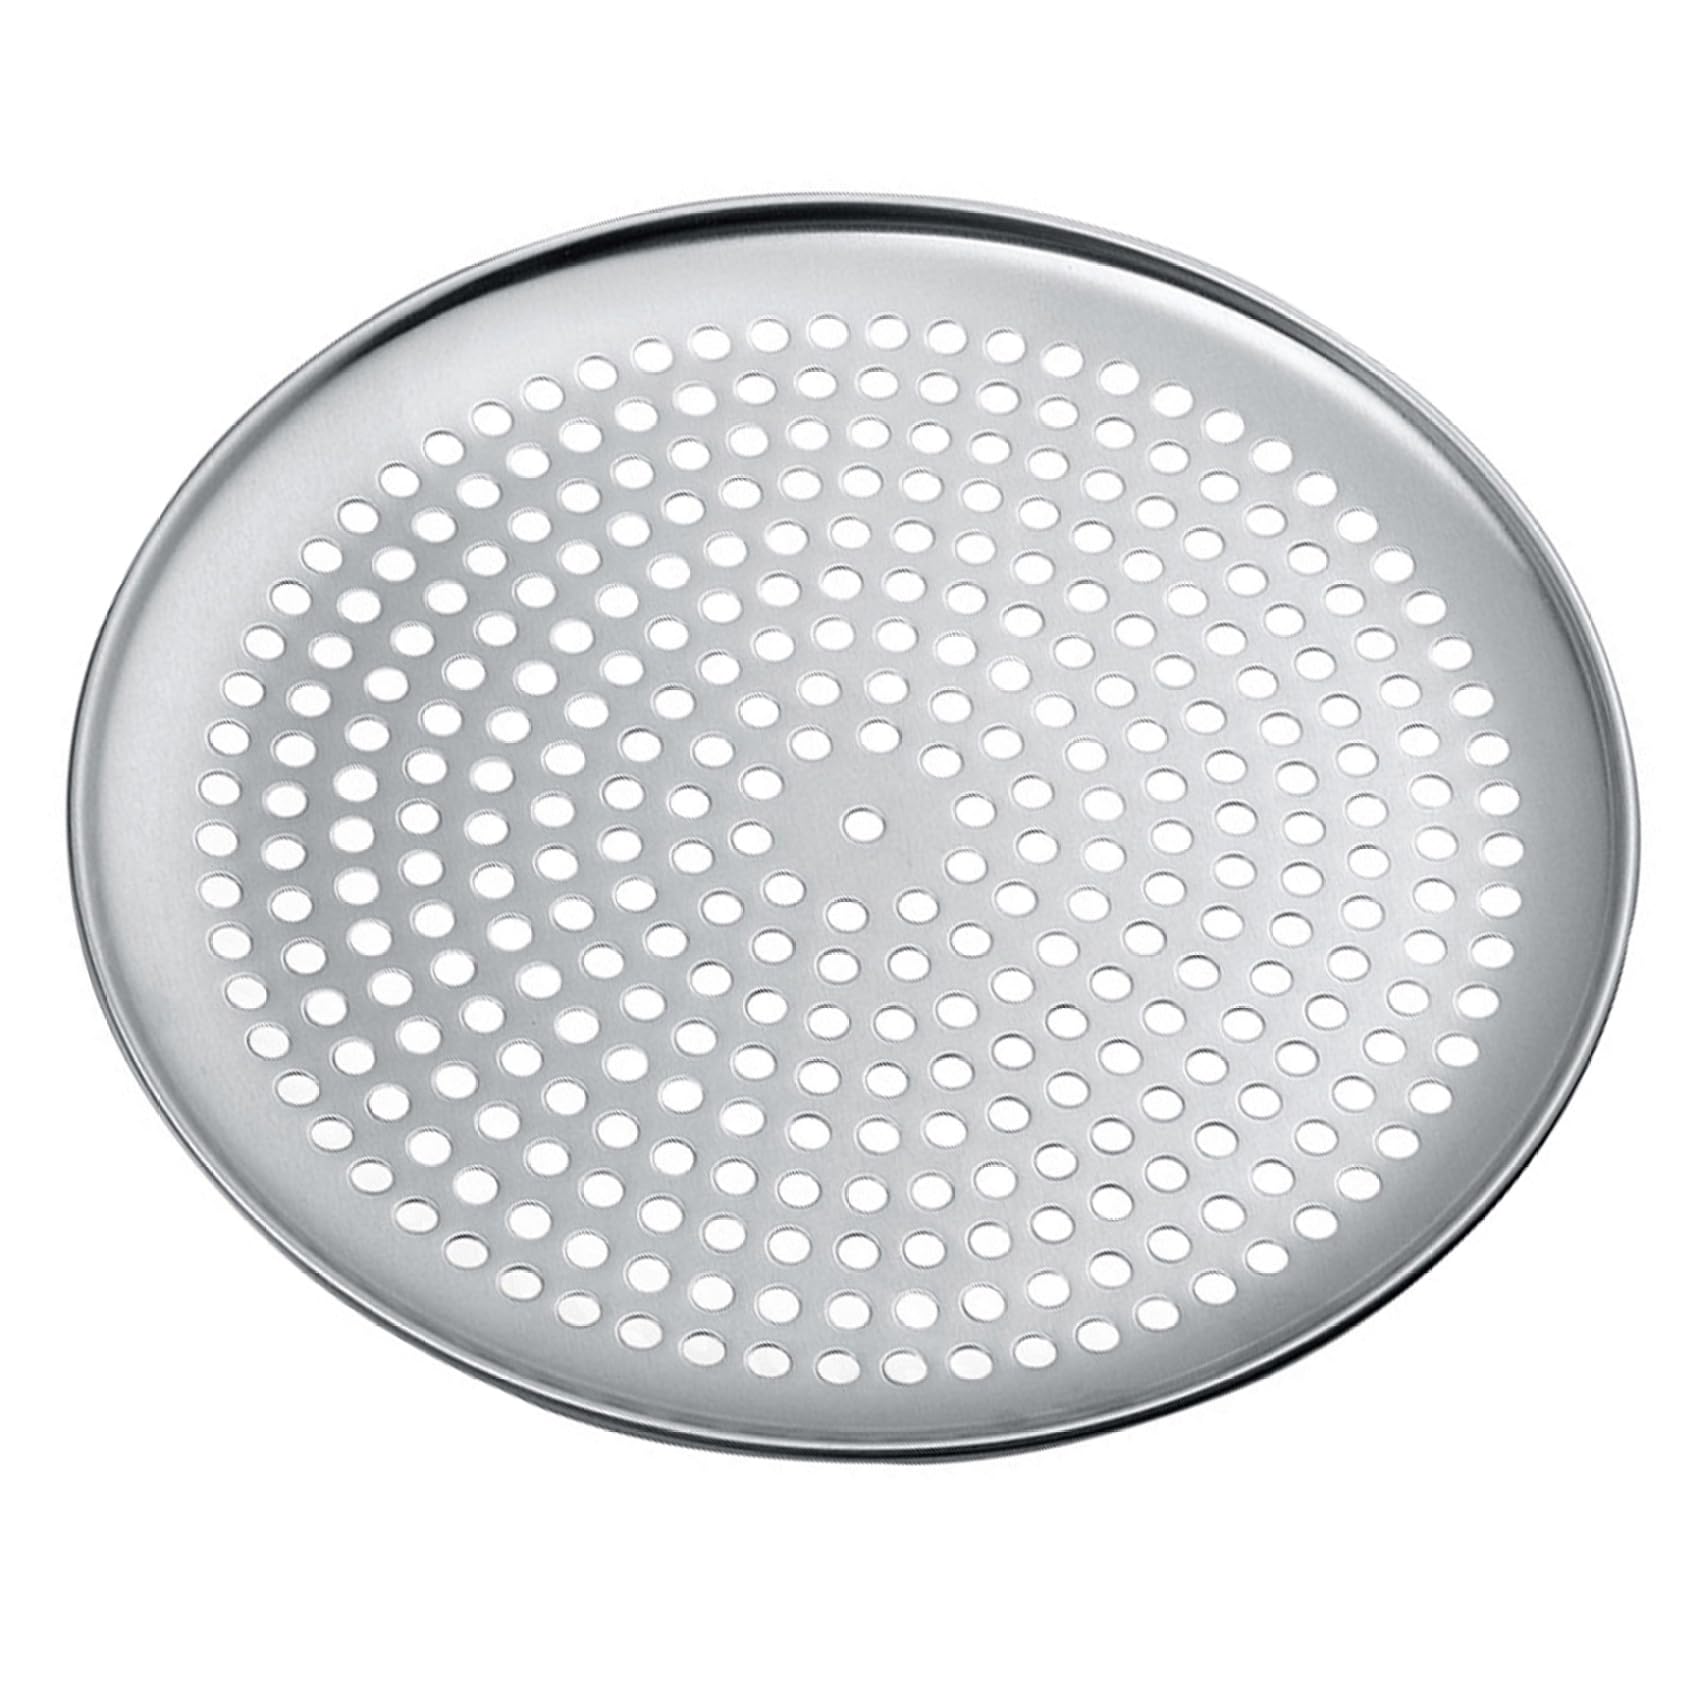 QCdeSoulBLV Pizza Pan With Holes, Round Pizza Pan 16 Inch Nonstick Steel Pizza Pan Tray with Perforated Holes for Baking Pie Pizza Crisper Server